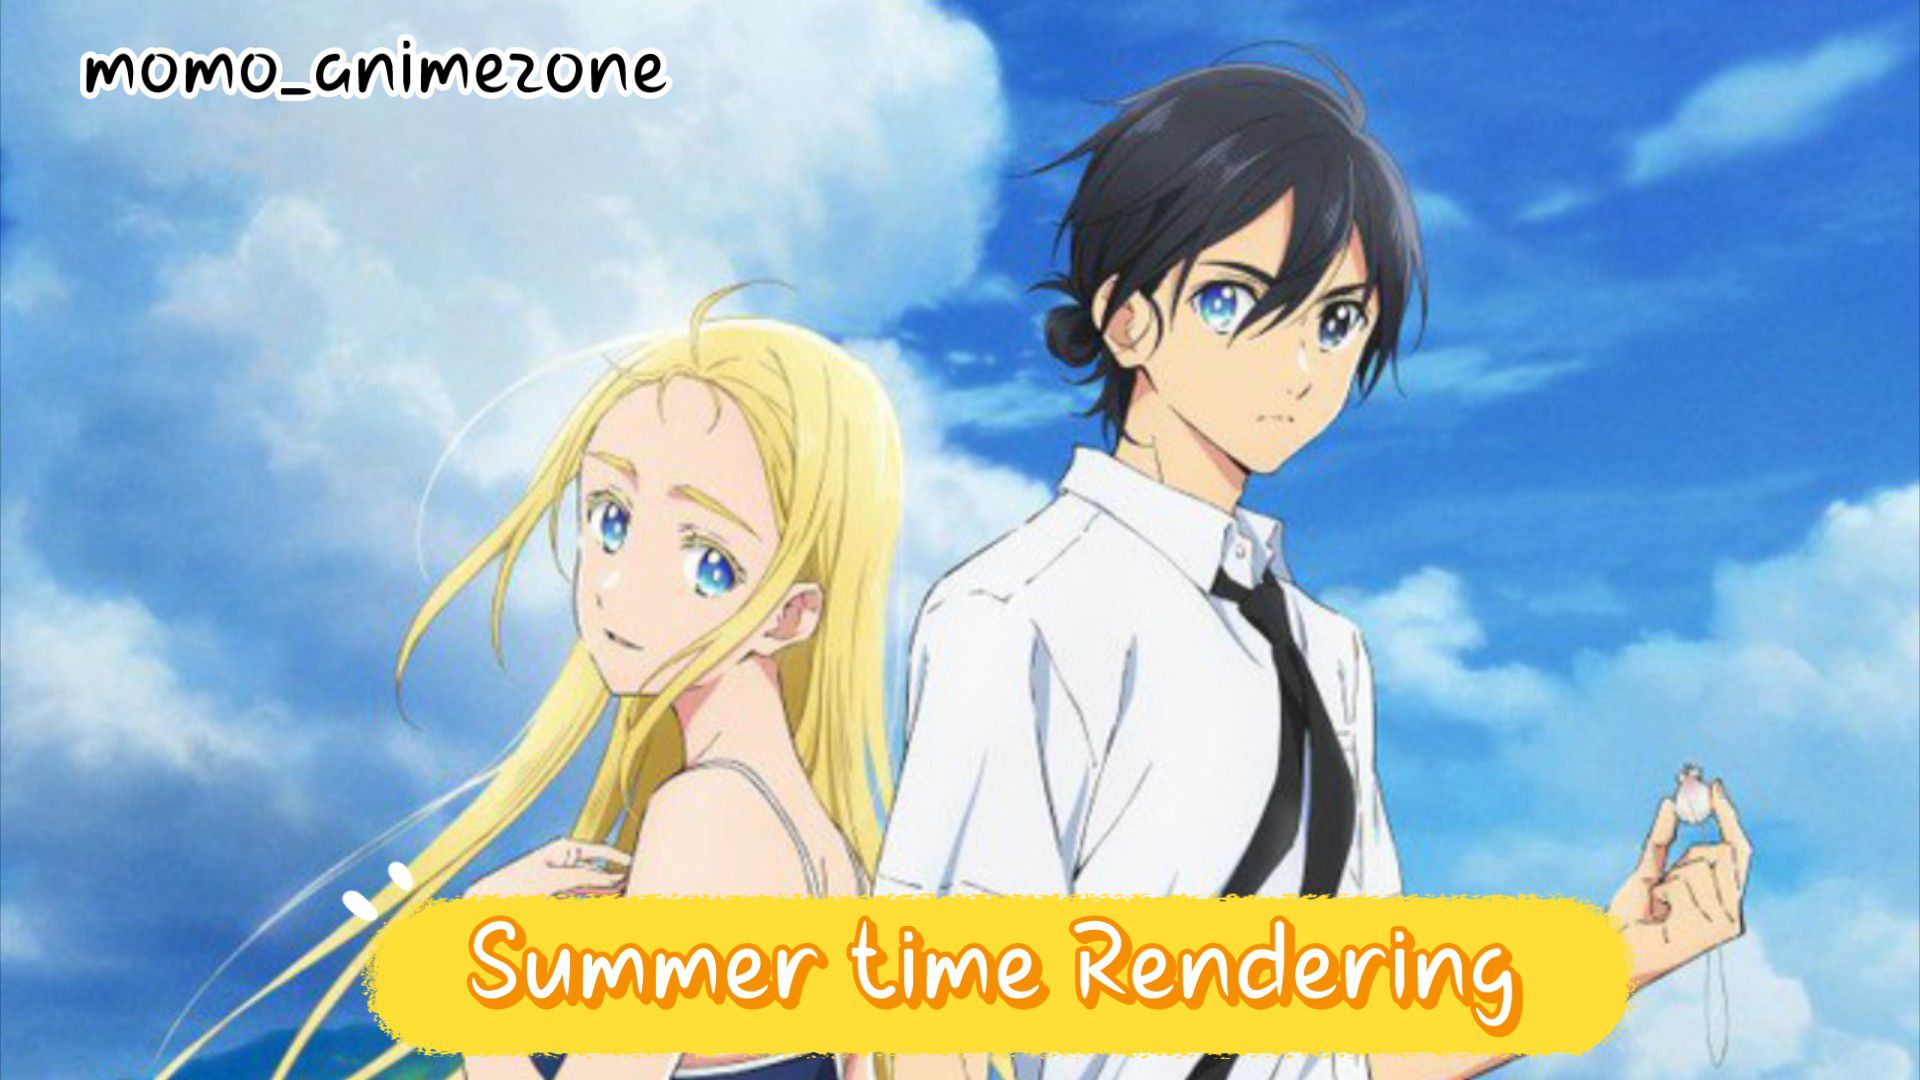 Summer Time Rendering - Official Trailer 